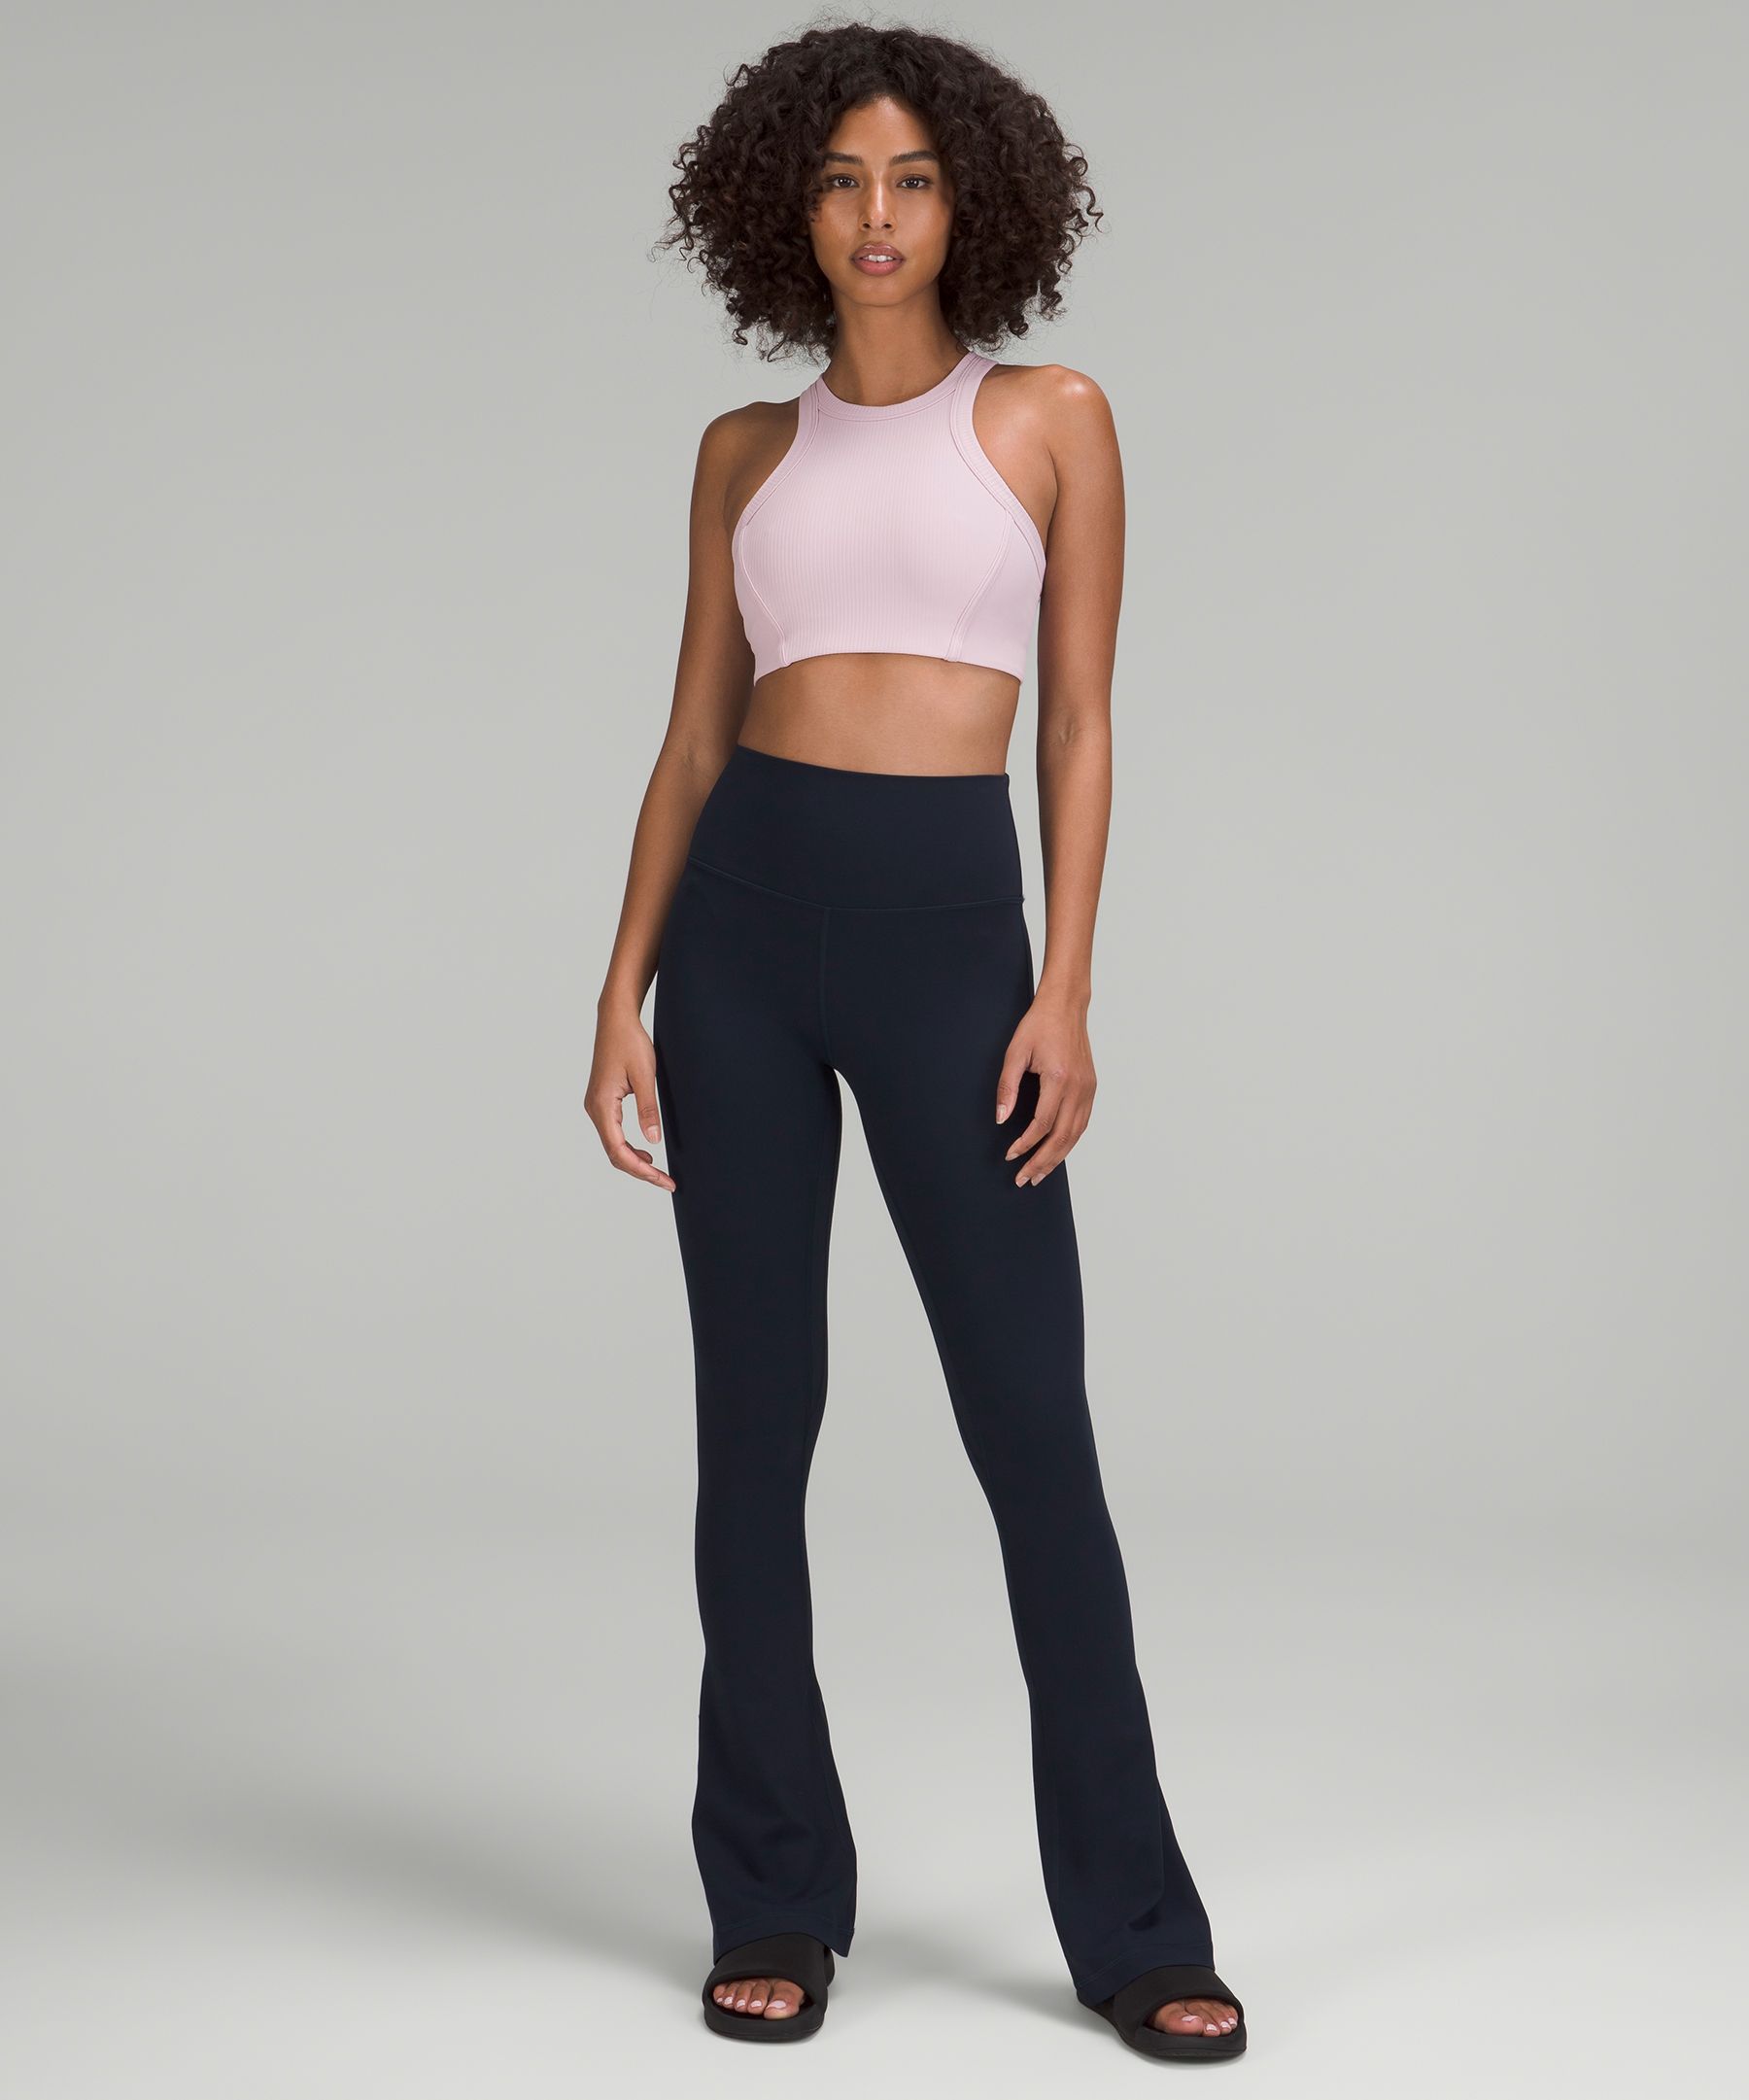 What do we think of these lululemon Align Mini-Flare pants in Java? I